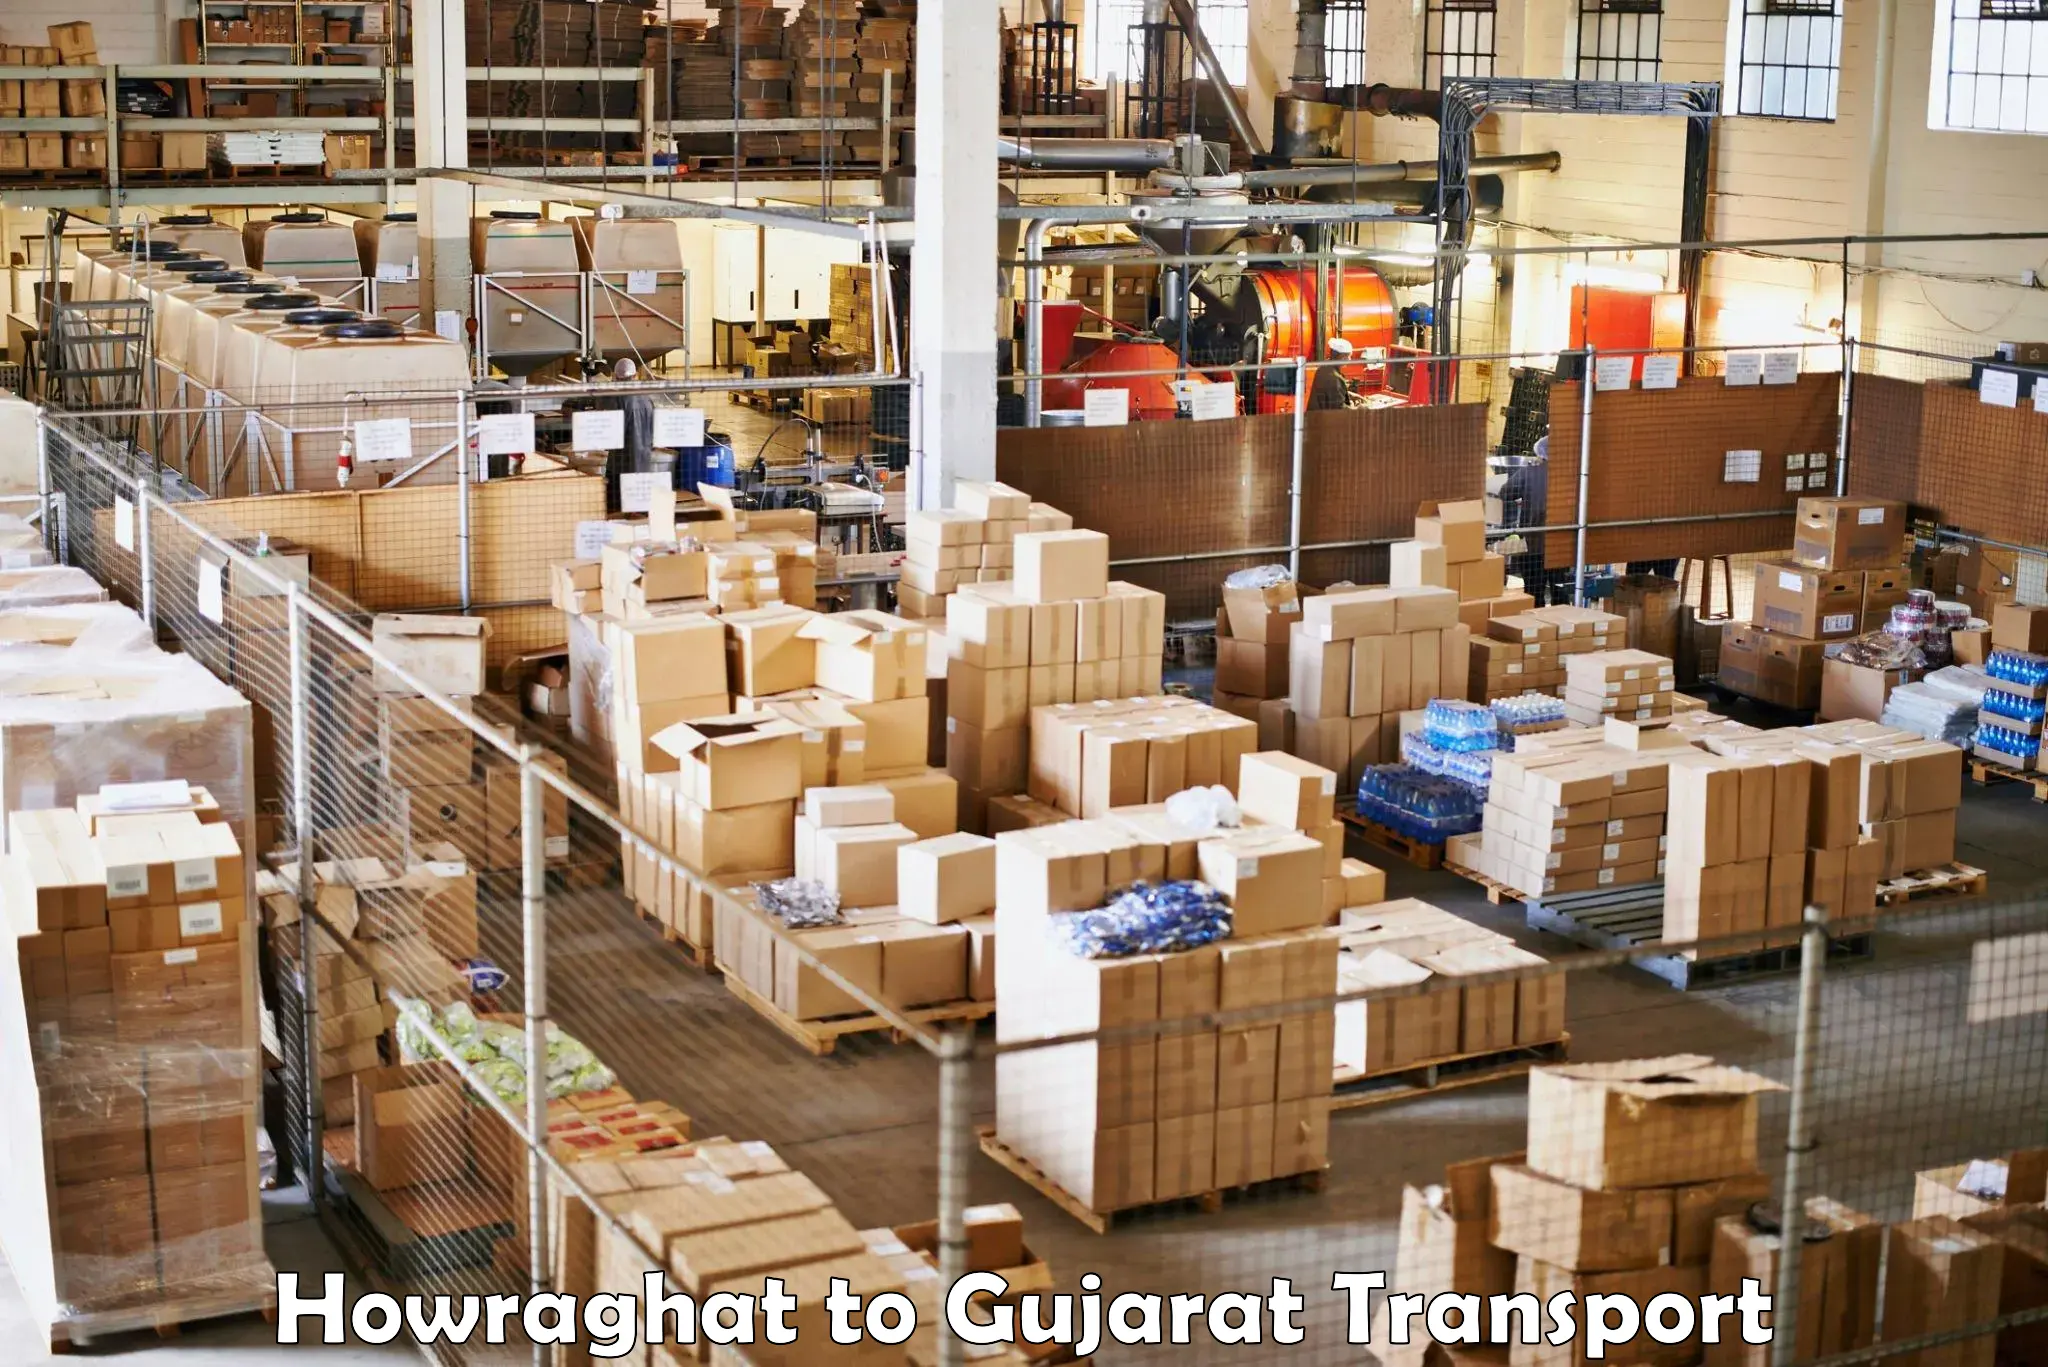 Domestic goods transportation services Howraghat to GIDC